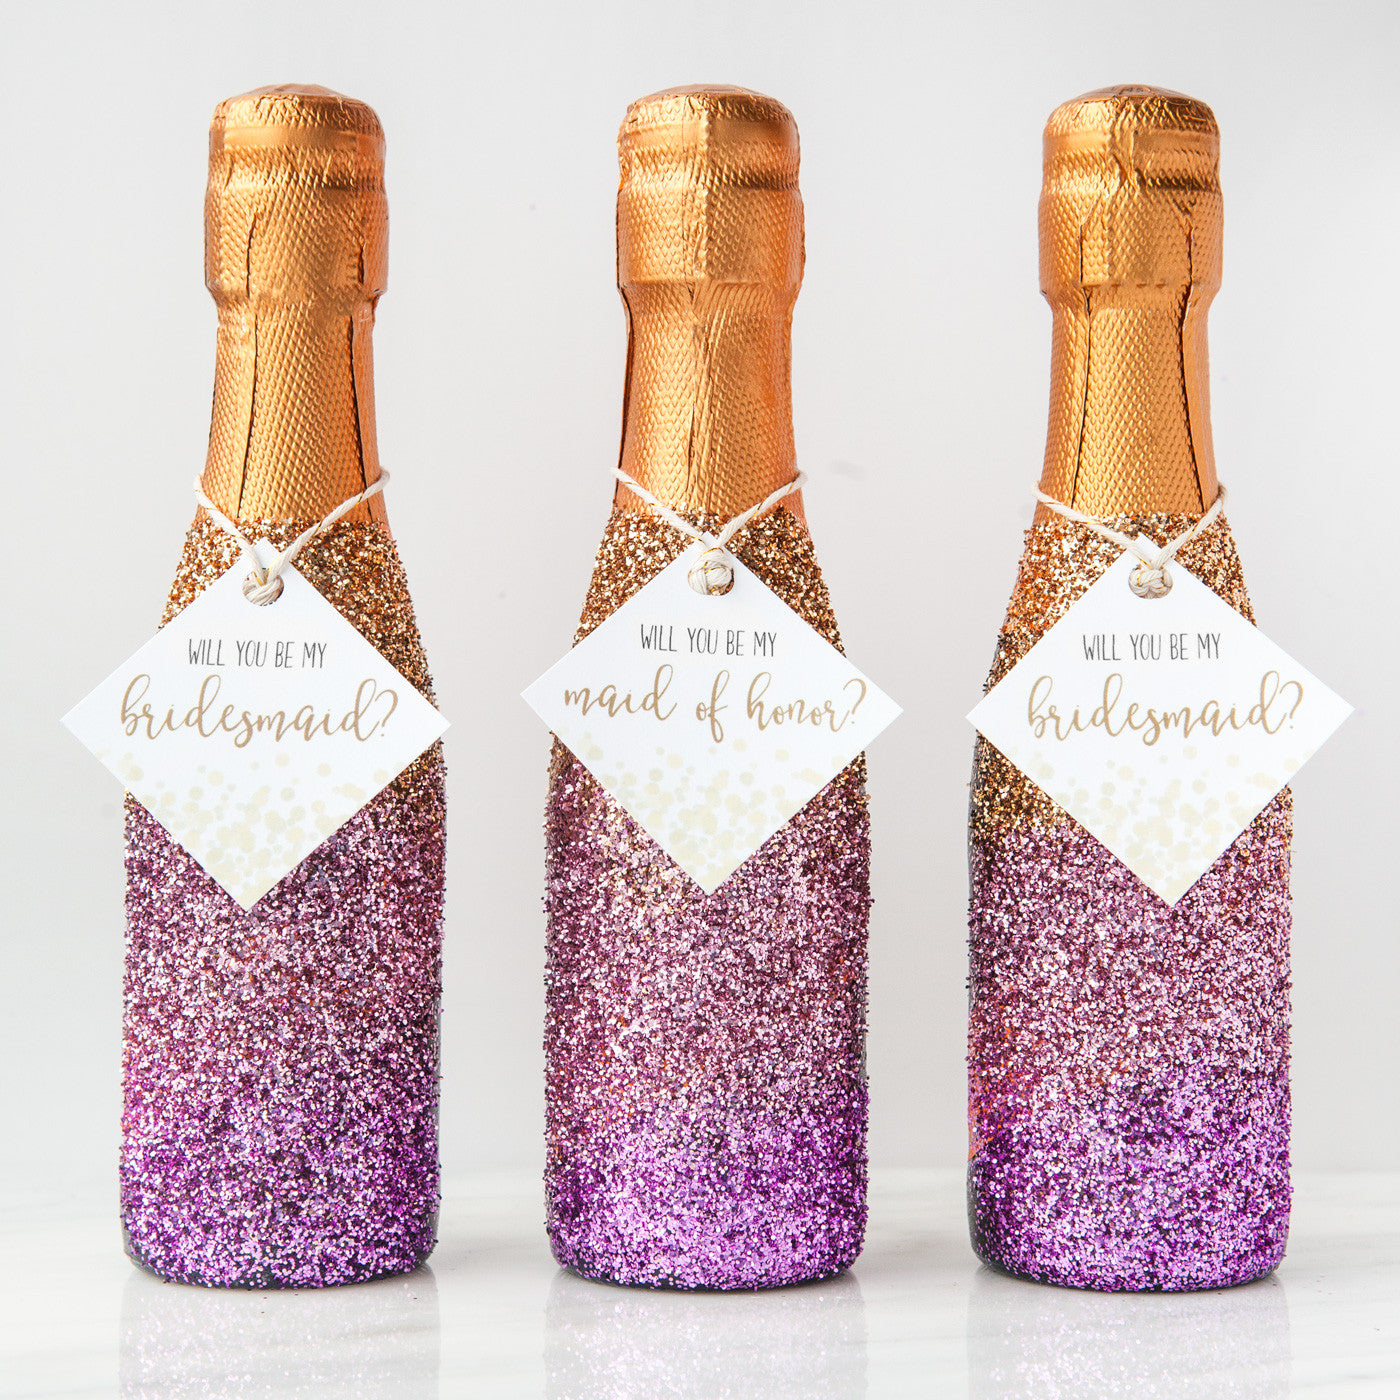 DIY Glitter Champagne Bottle Bridesmaid Proposal (with FREE printables!)